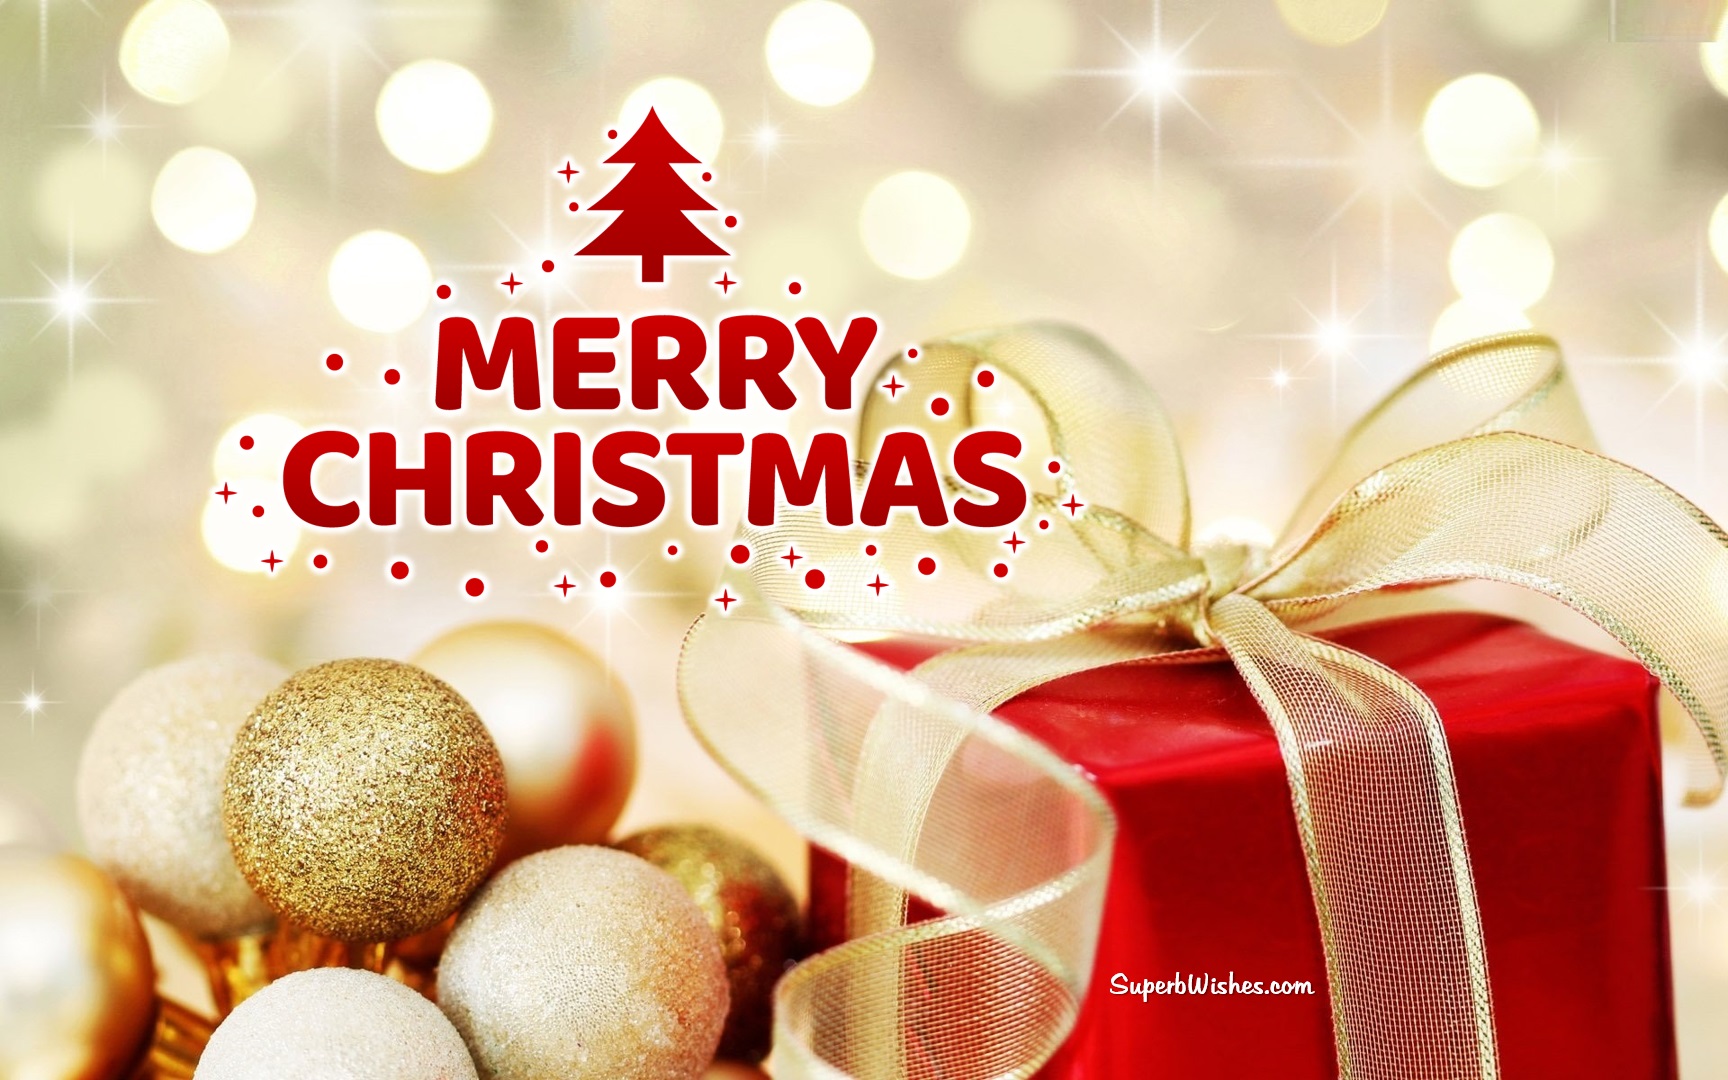 Merry Christmas Free Images